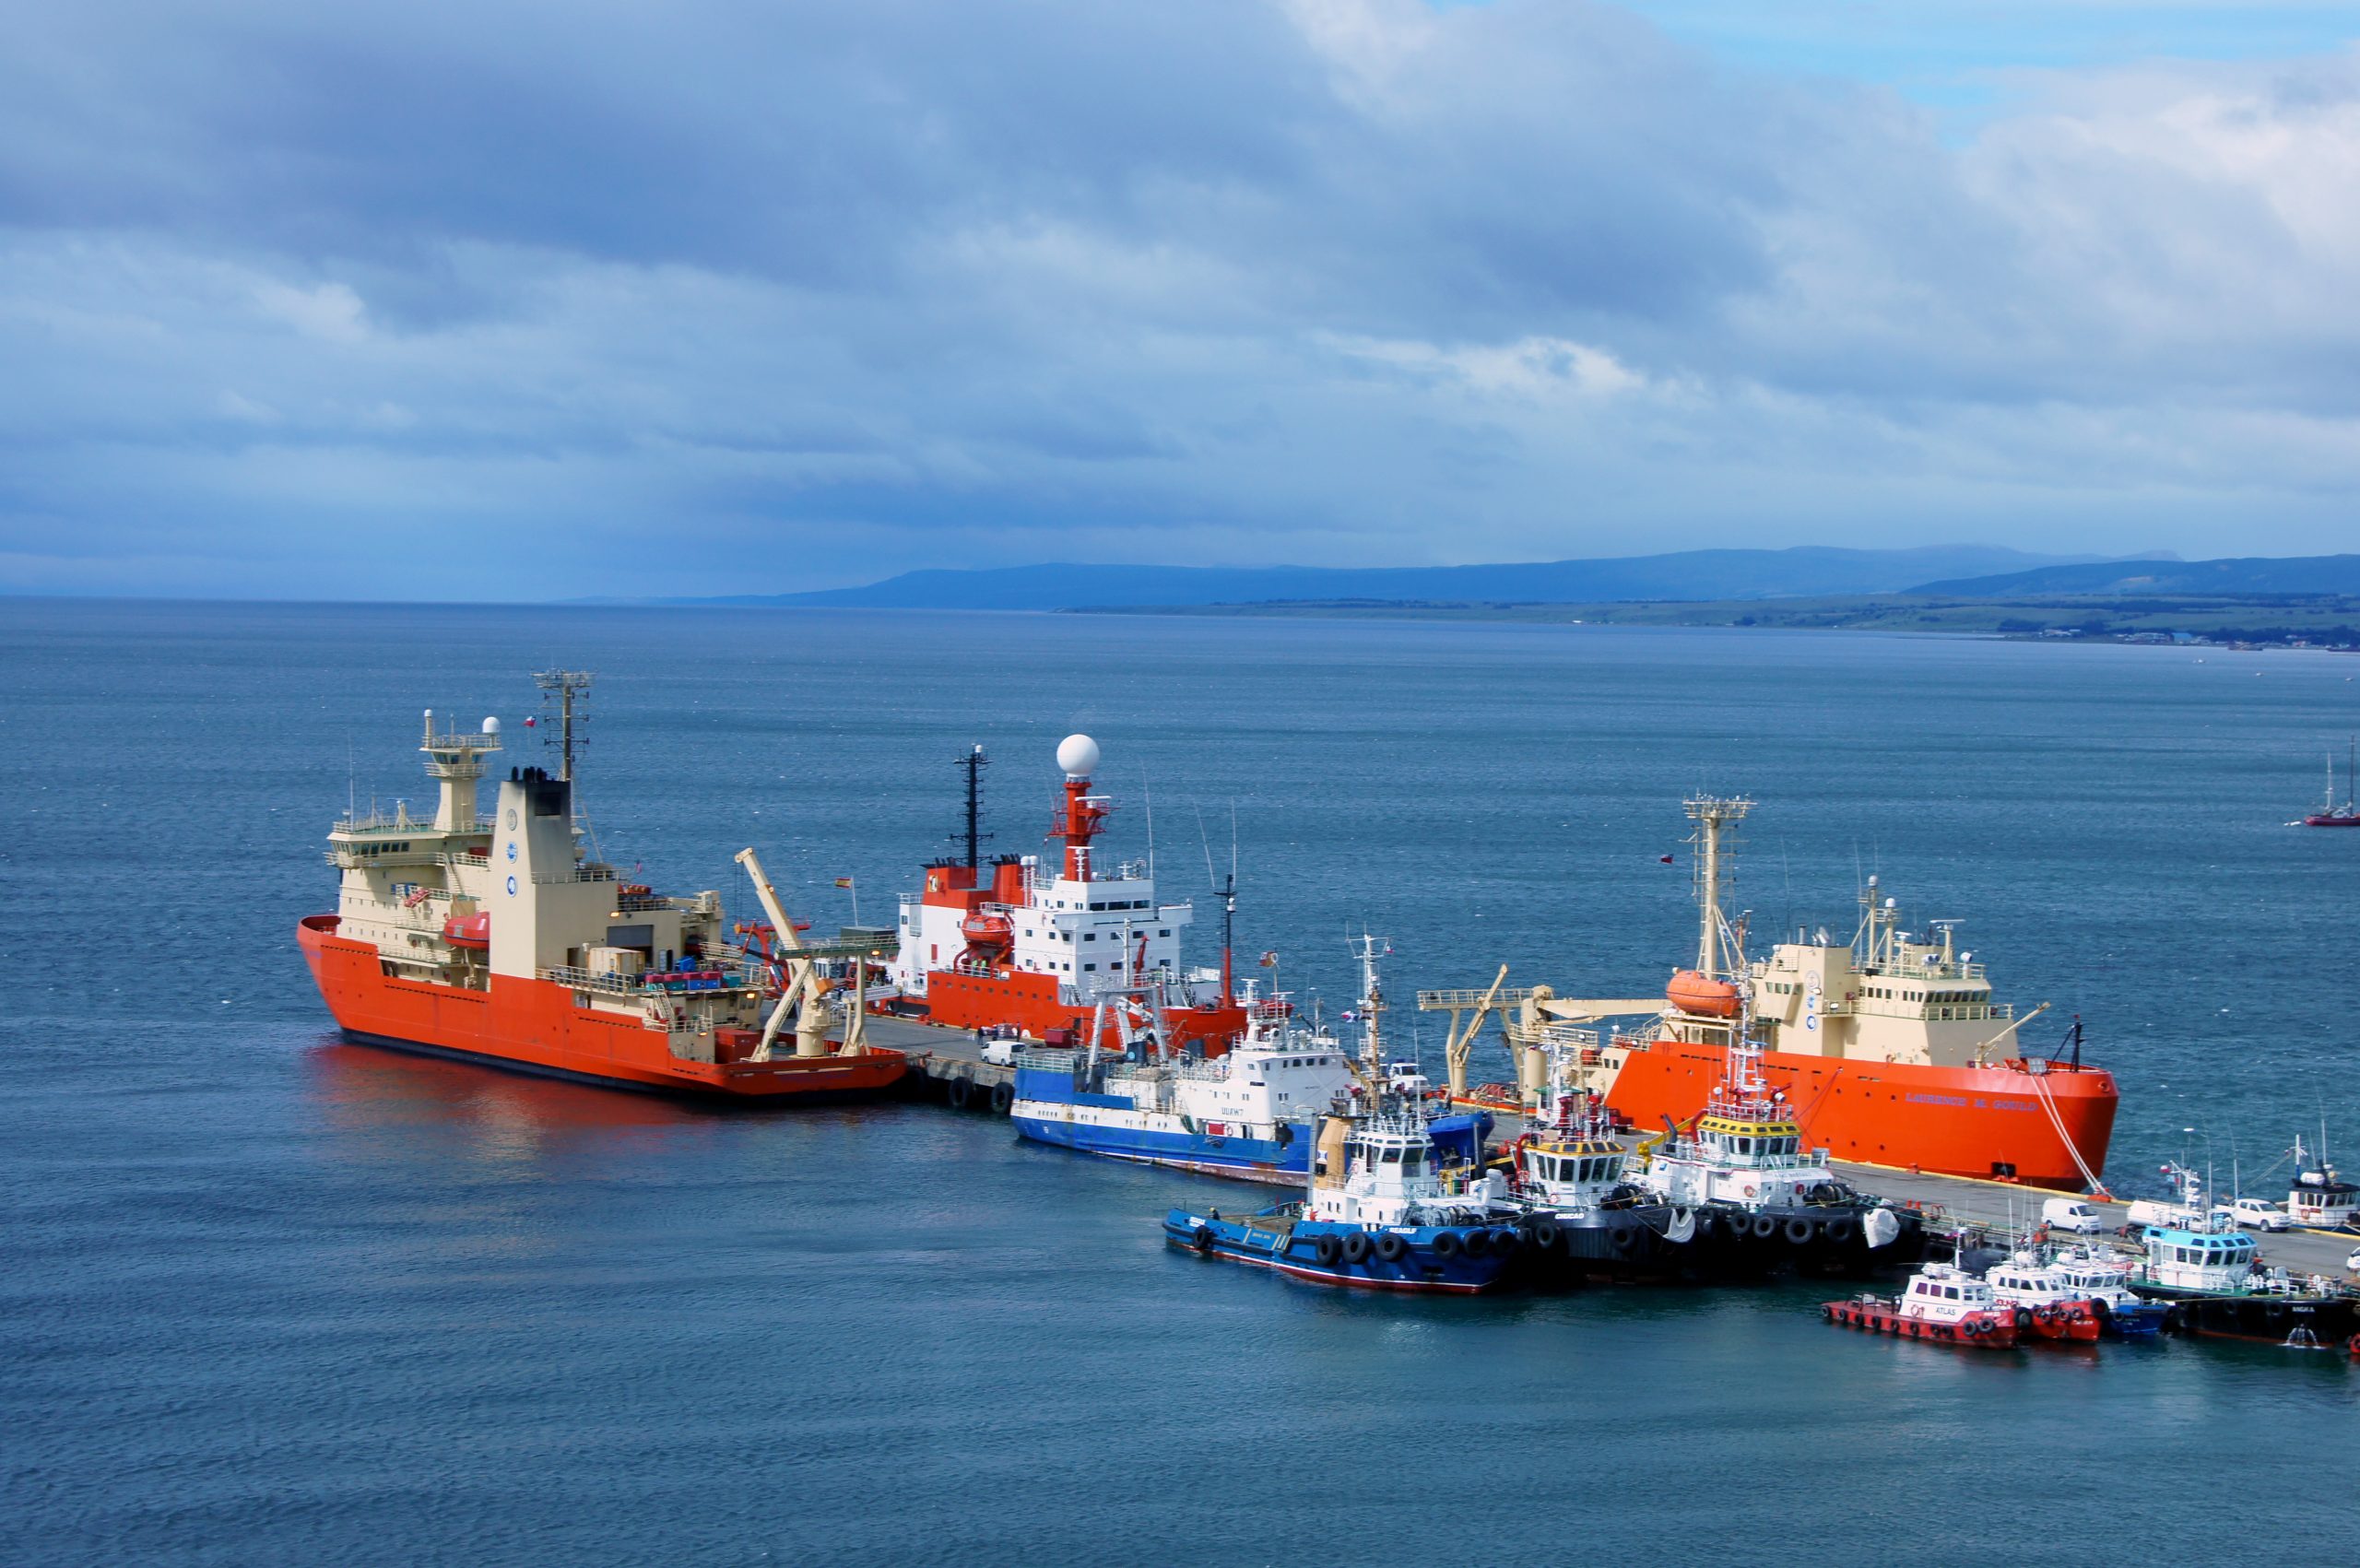 The U.S. Antarctic Program's two research vessels dock at the Prat Pier, Punta Arenas, Chile. At left is the Nathaniel B. Palmer. At right is the Laurence M. Gould. The red and white ship in between the two U.S. vessels is a Chilean research vessel. Punta Arenas is the point of departure for the majority of U.S. research in the Antarctic Peninsula area.